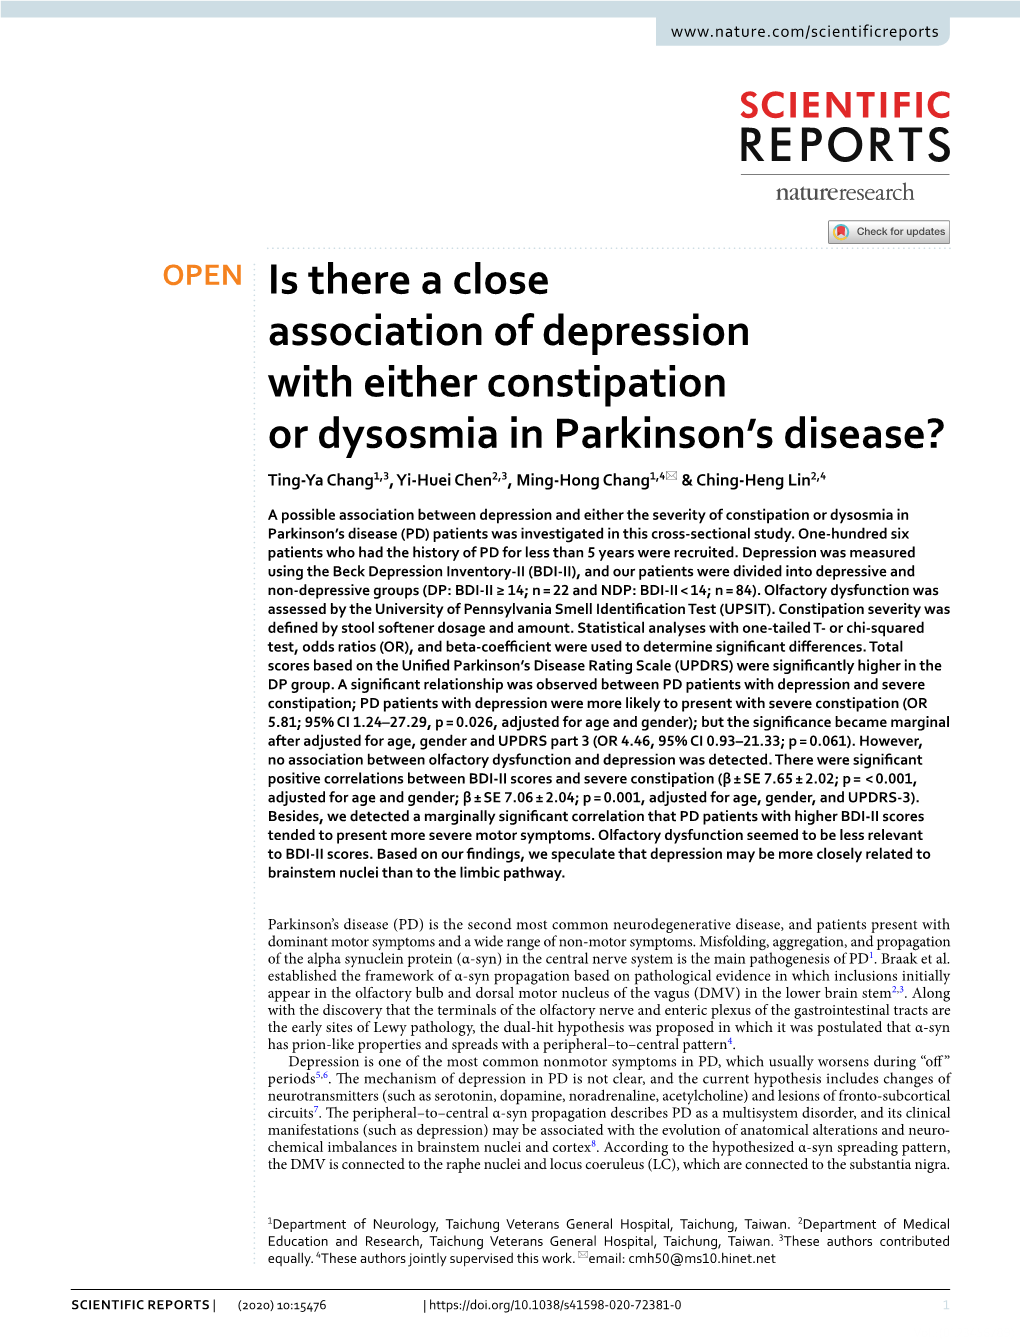 Is There a Close Association of Depression with Either Constipation